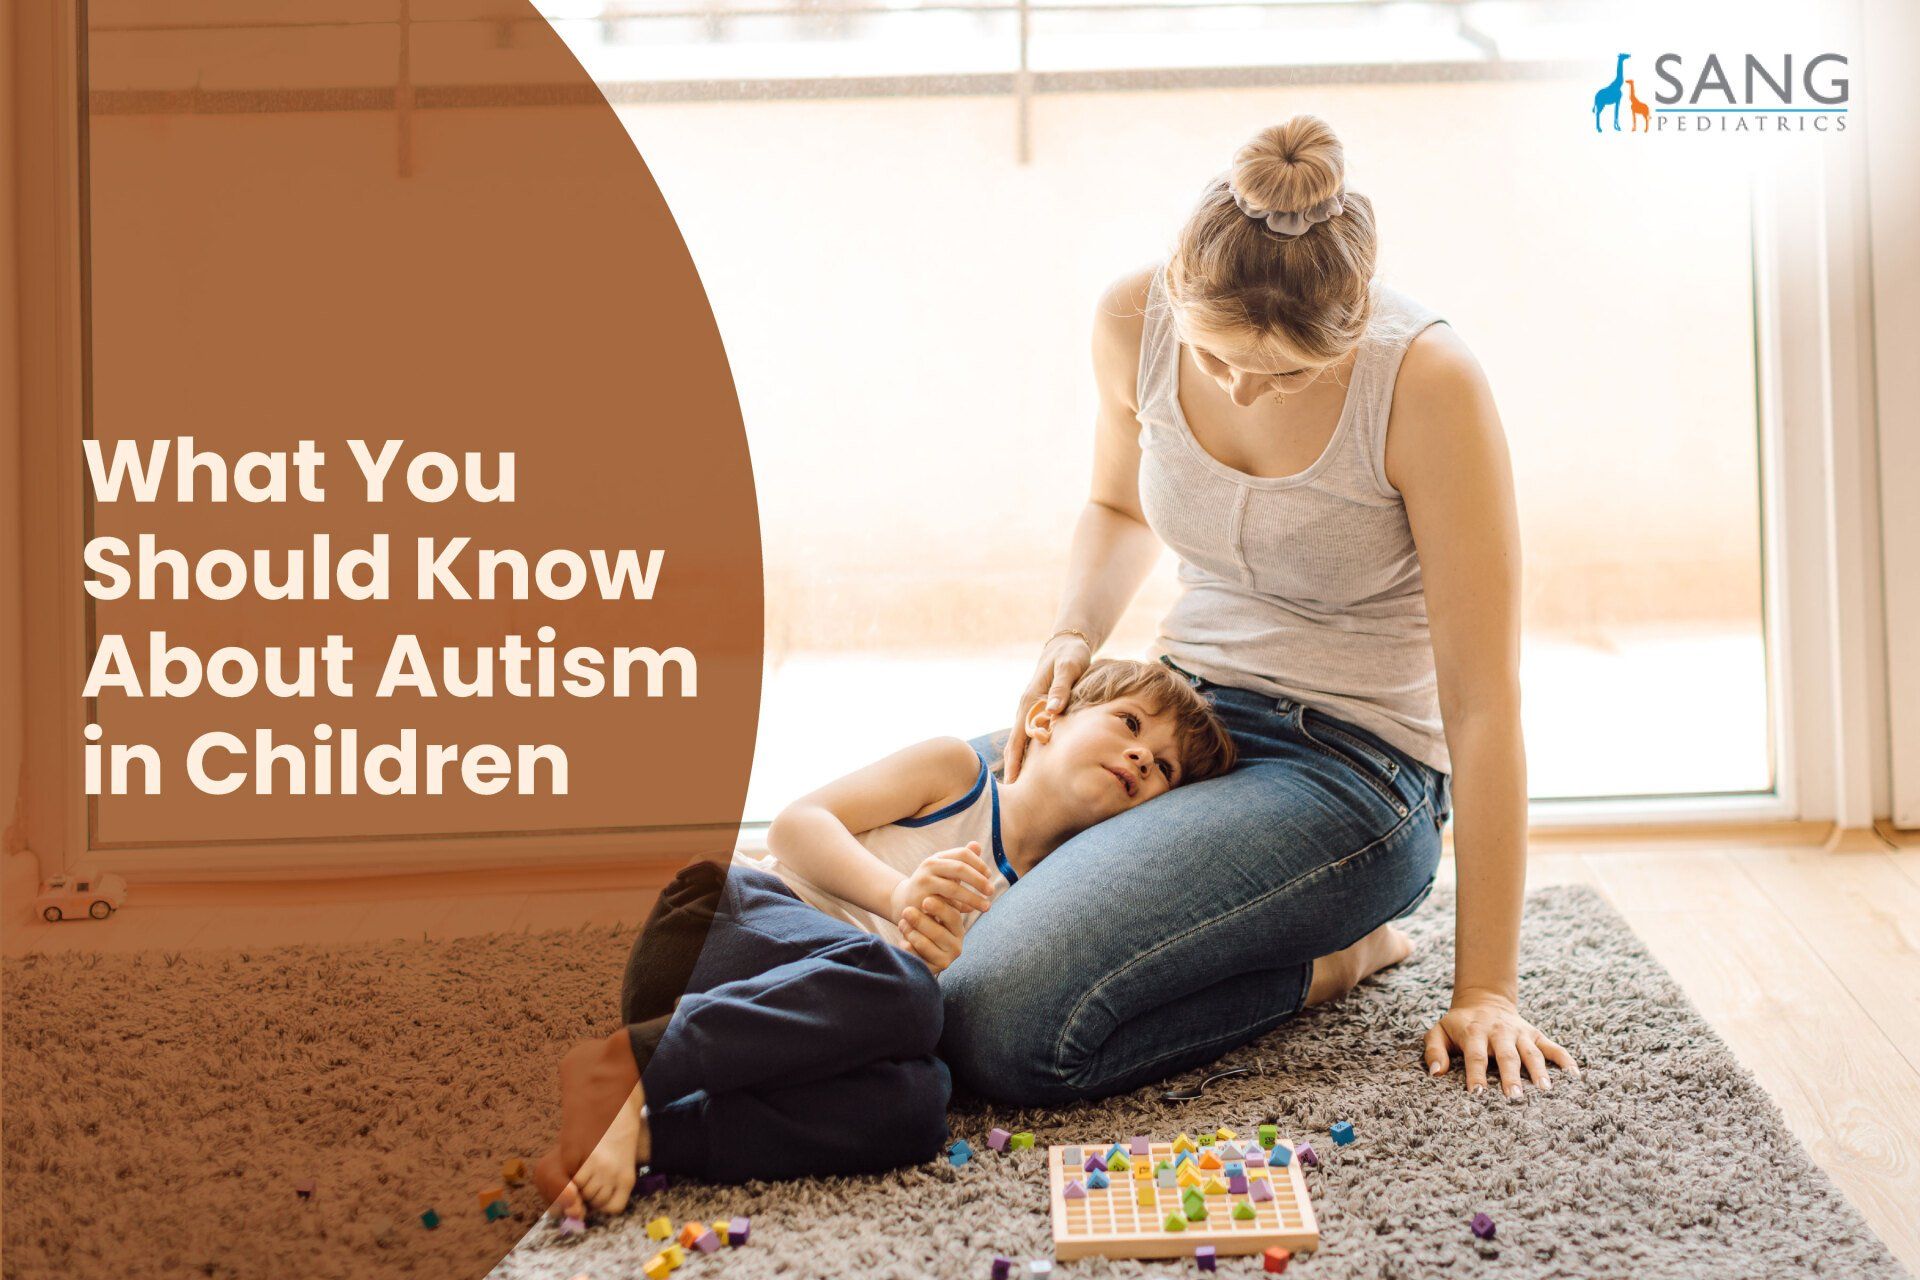 What You Should Know About Autism in Children